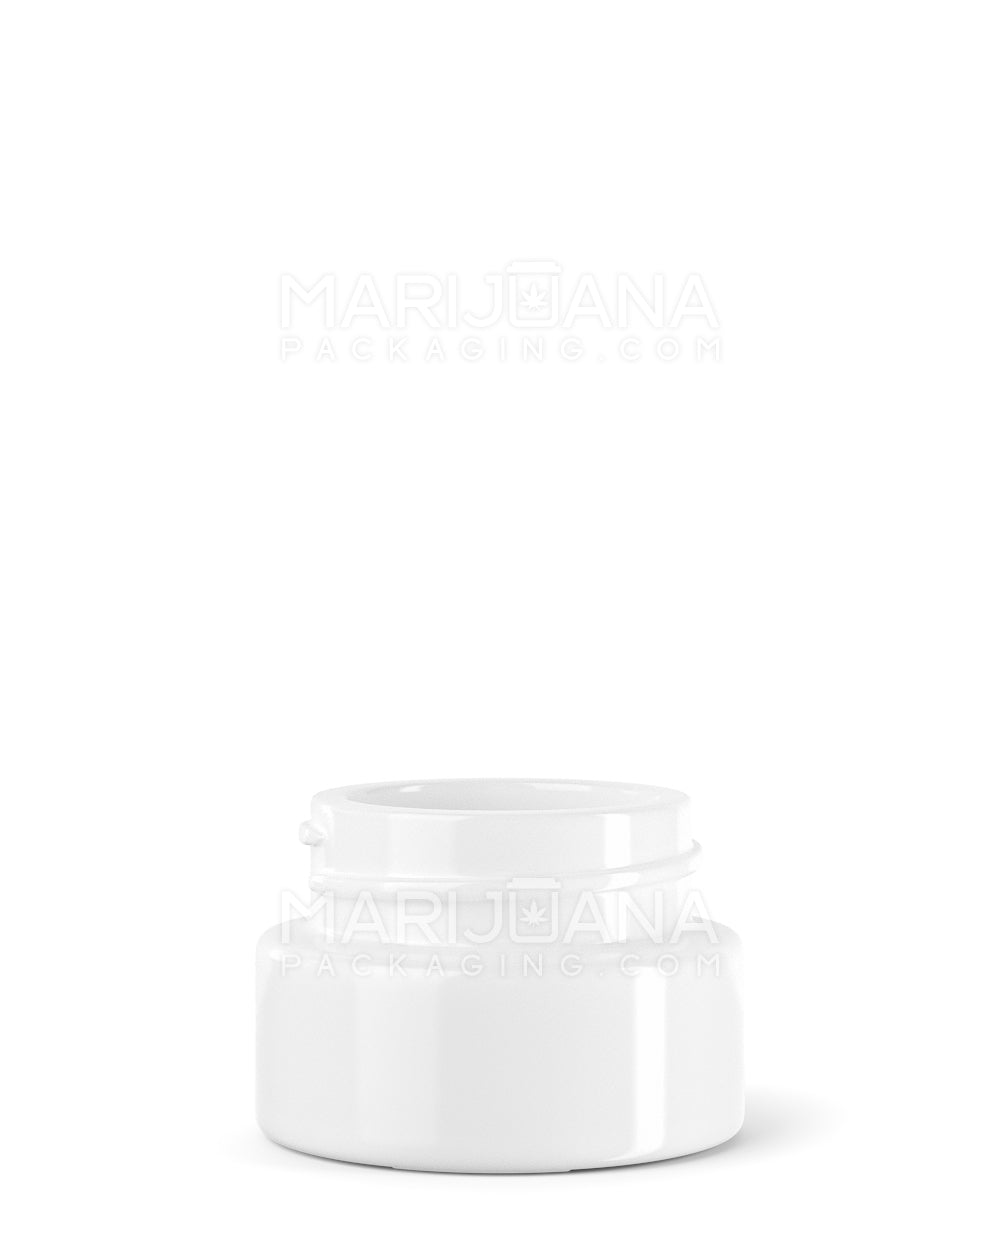 Child Resistant | Glossy White Glass Concentrate Containers w/ Cap | 32mm - 9mL - 320 Count